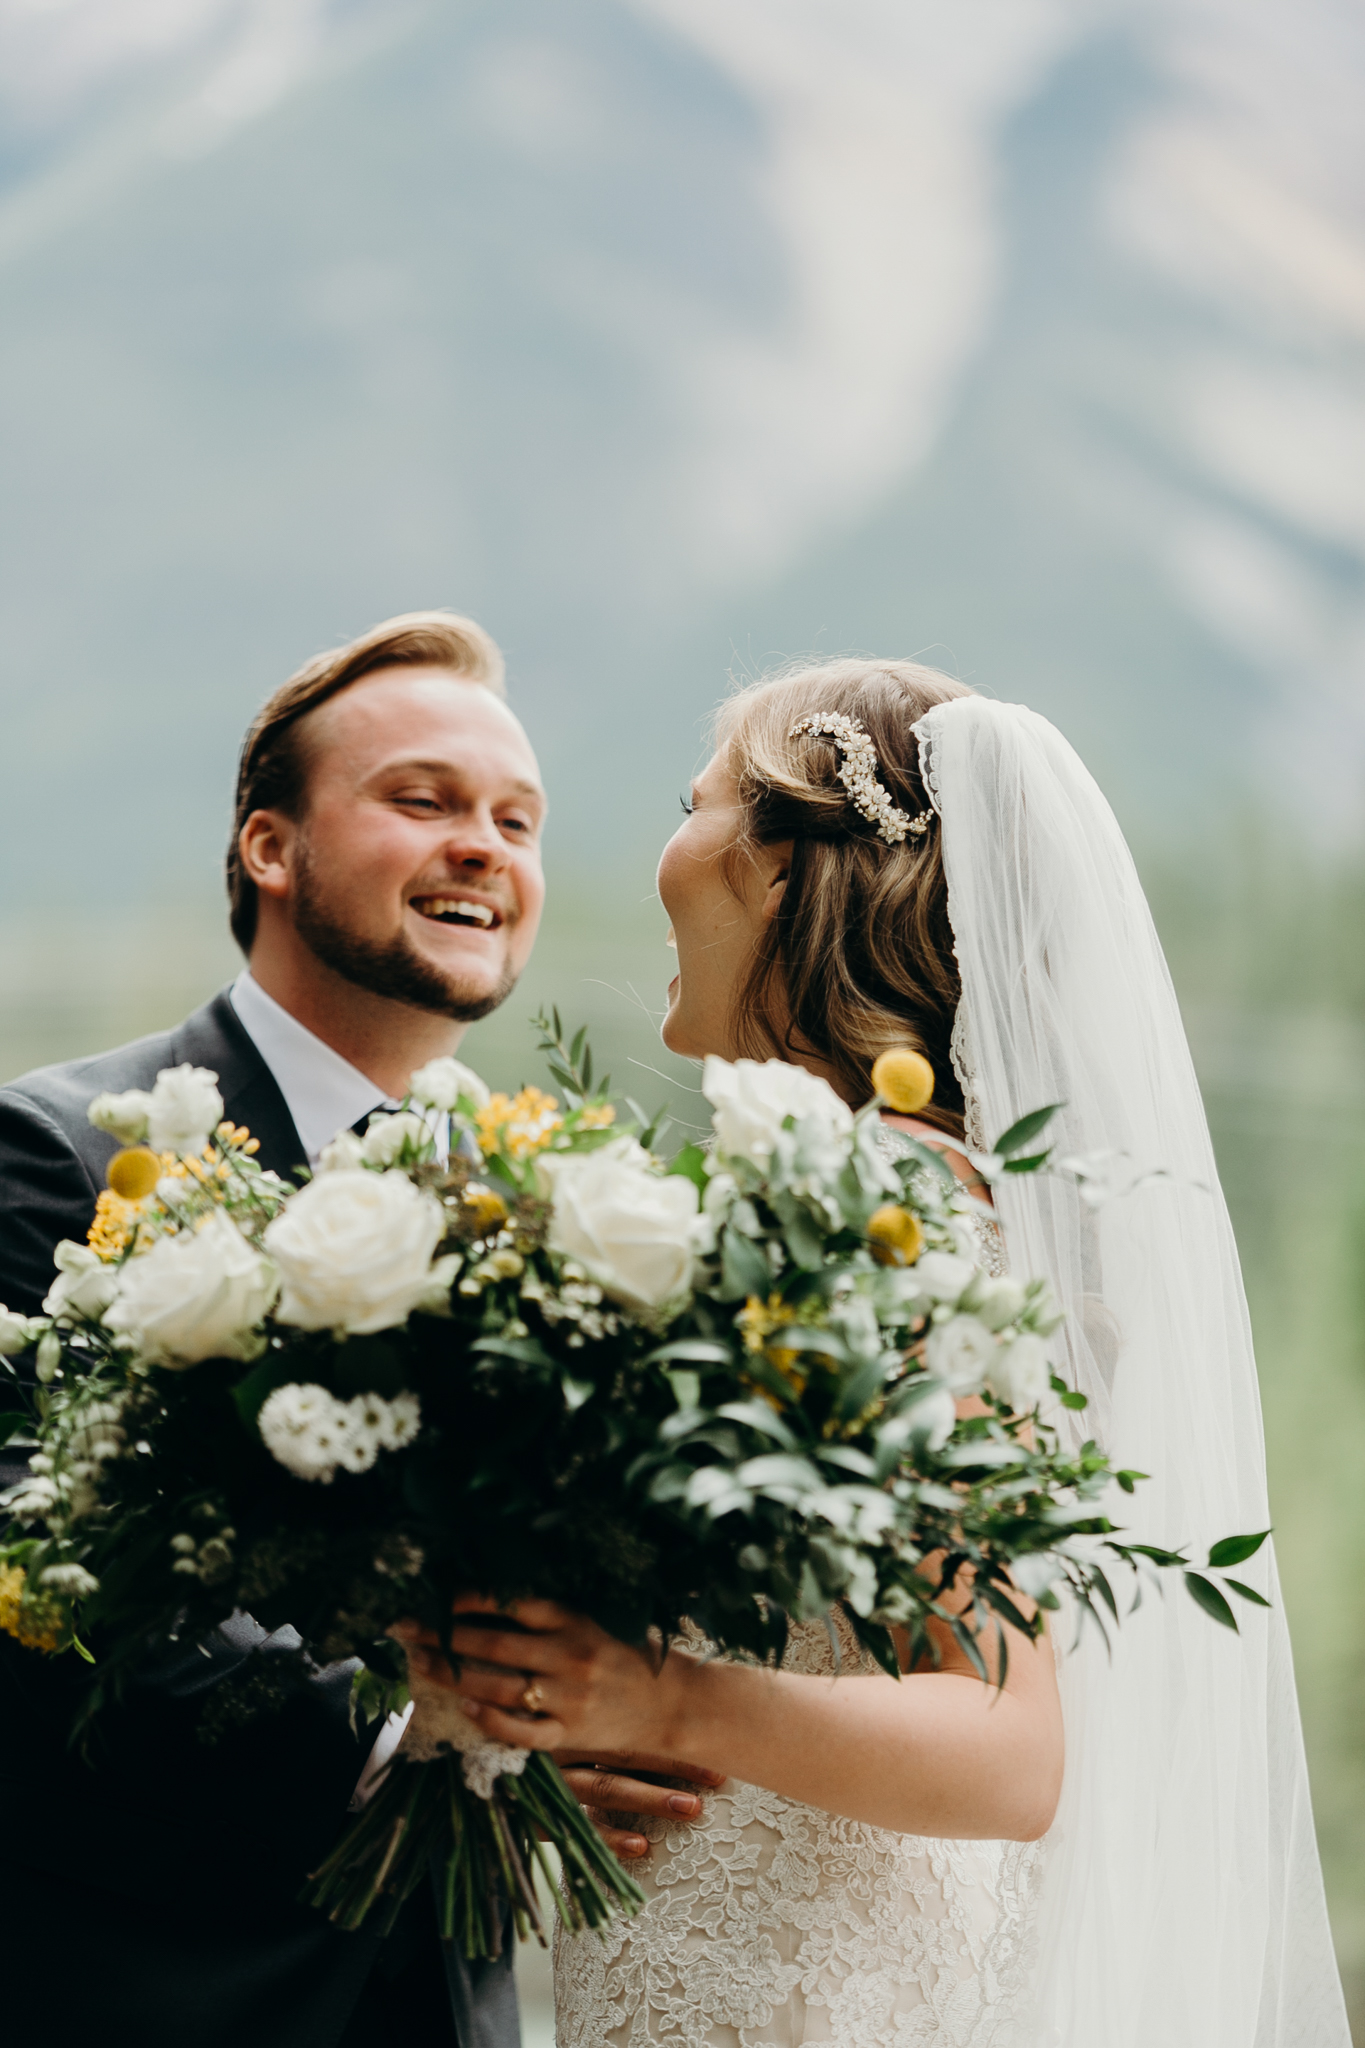 Bride and groom embrace romantic wedding photography MN destination wedding photographer Canmore AB